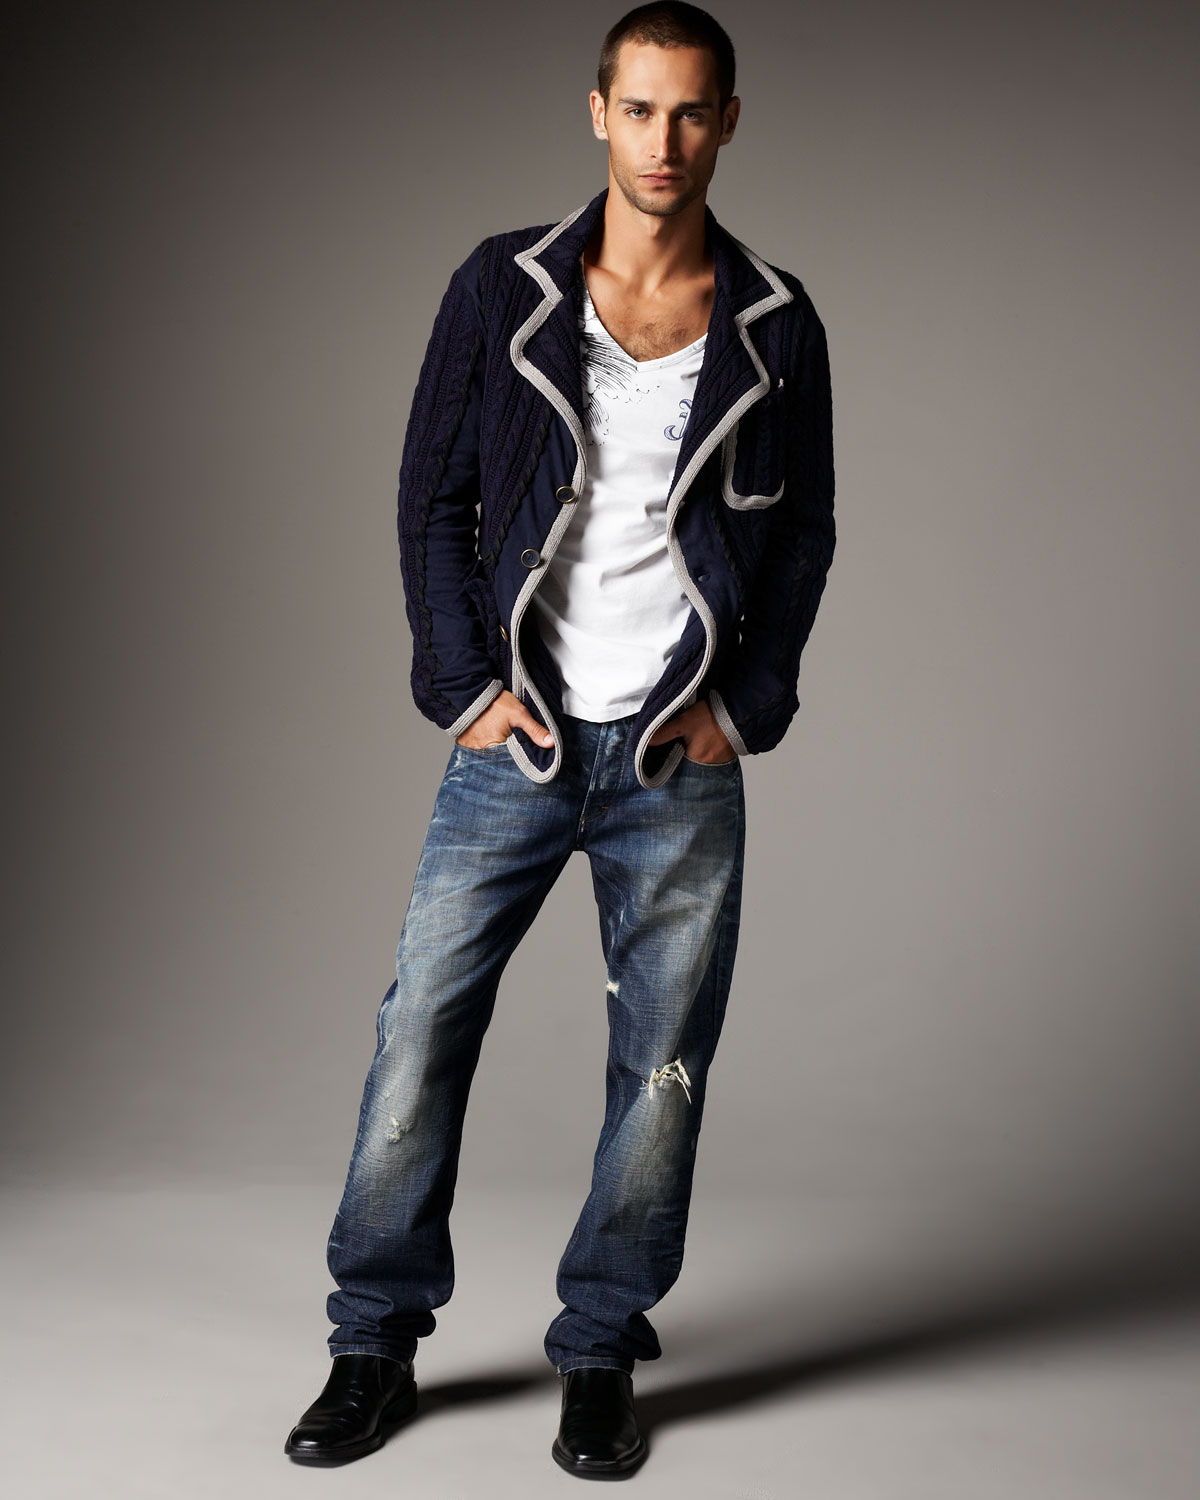 Clothing Style For Men: Rock Style Clothing For Men